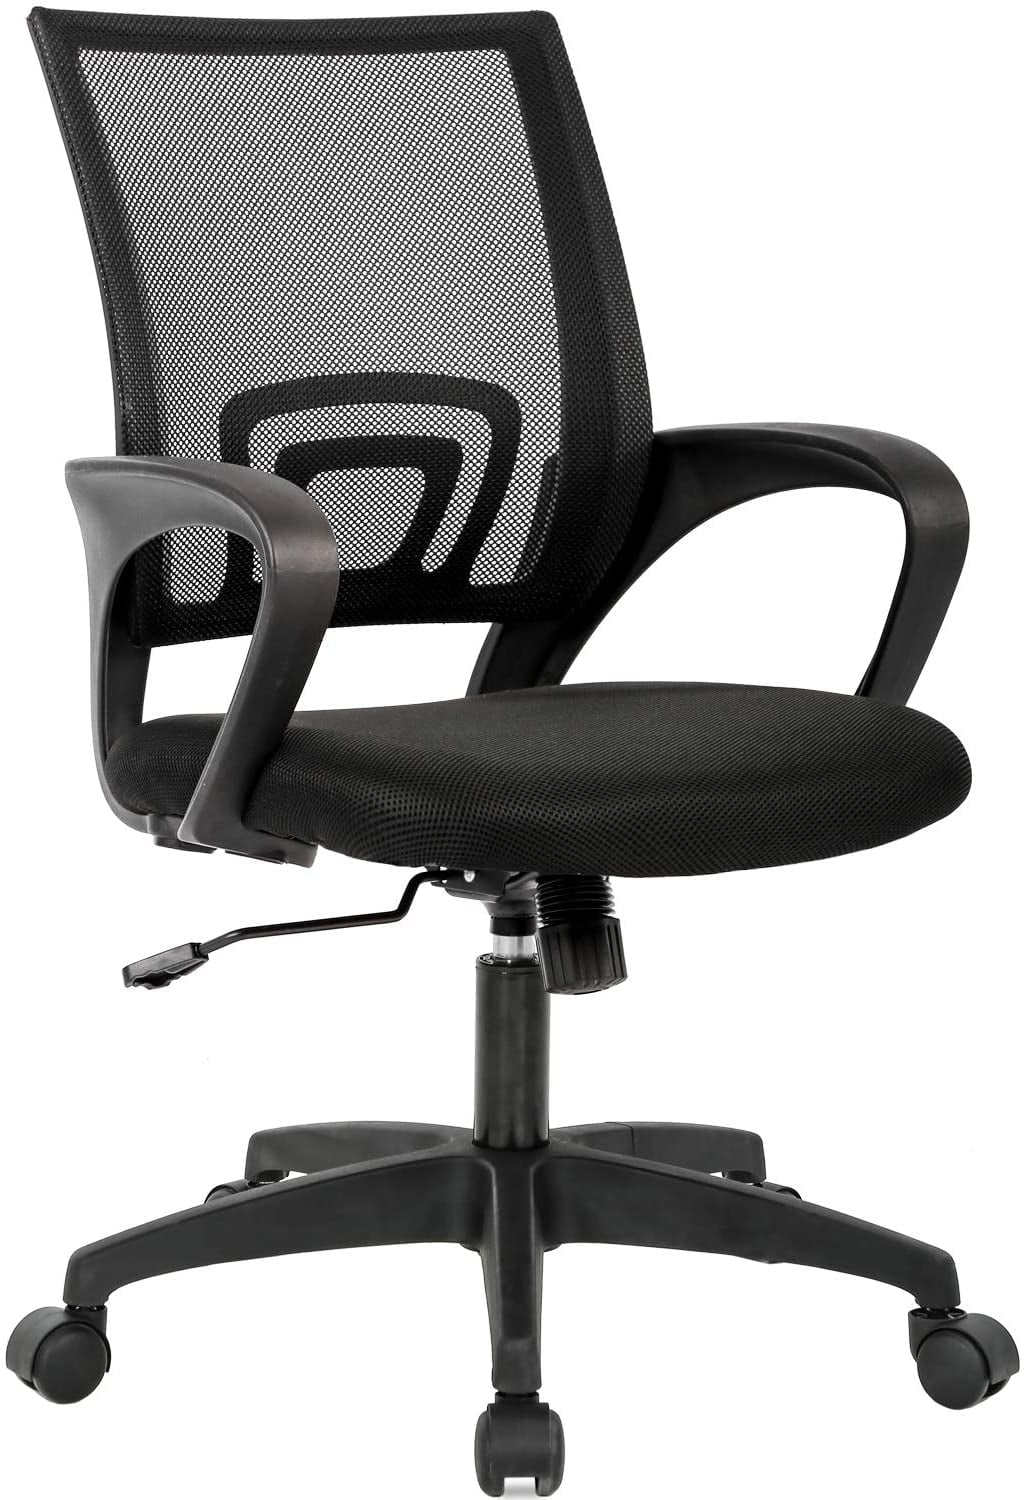 Ergonomic Mesh Computer Desk Chair with Lumbar Support Armrest Executive Rolling Swivel Adjustable Mid Back Office Chair